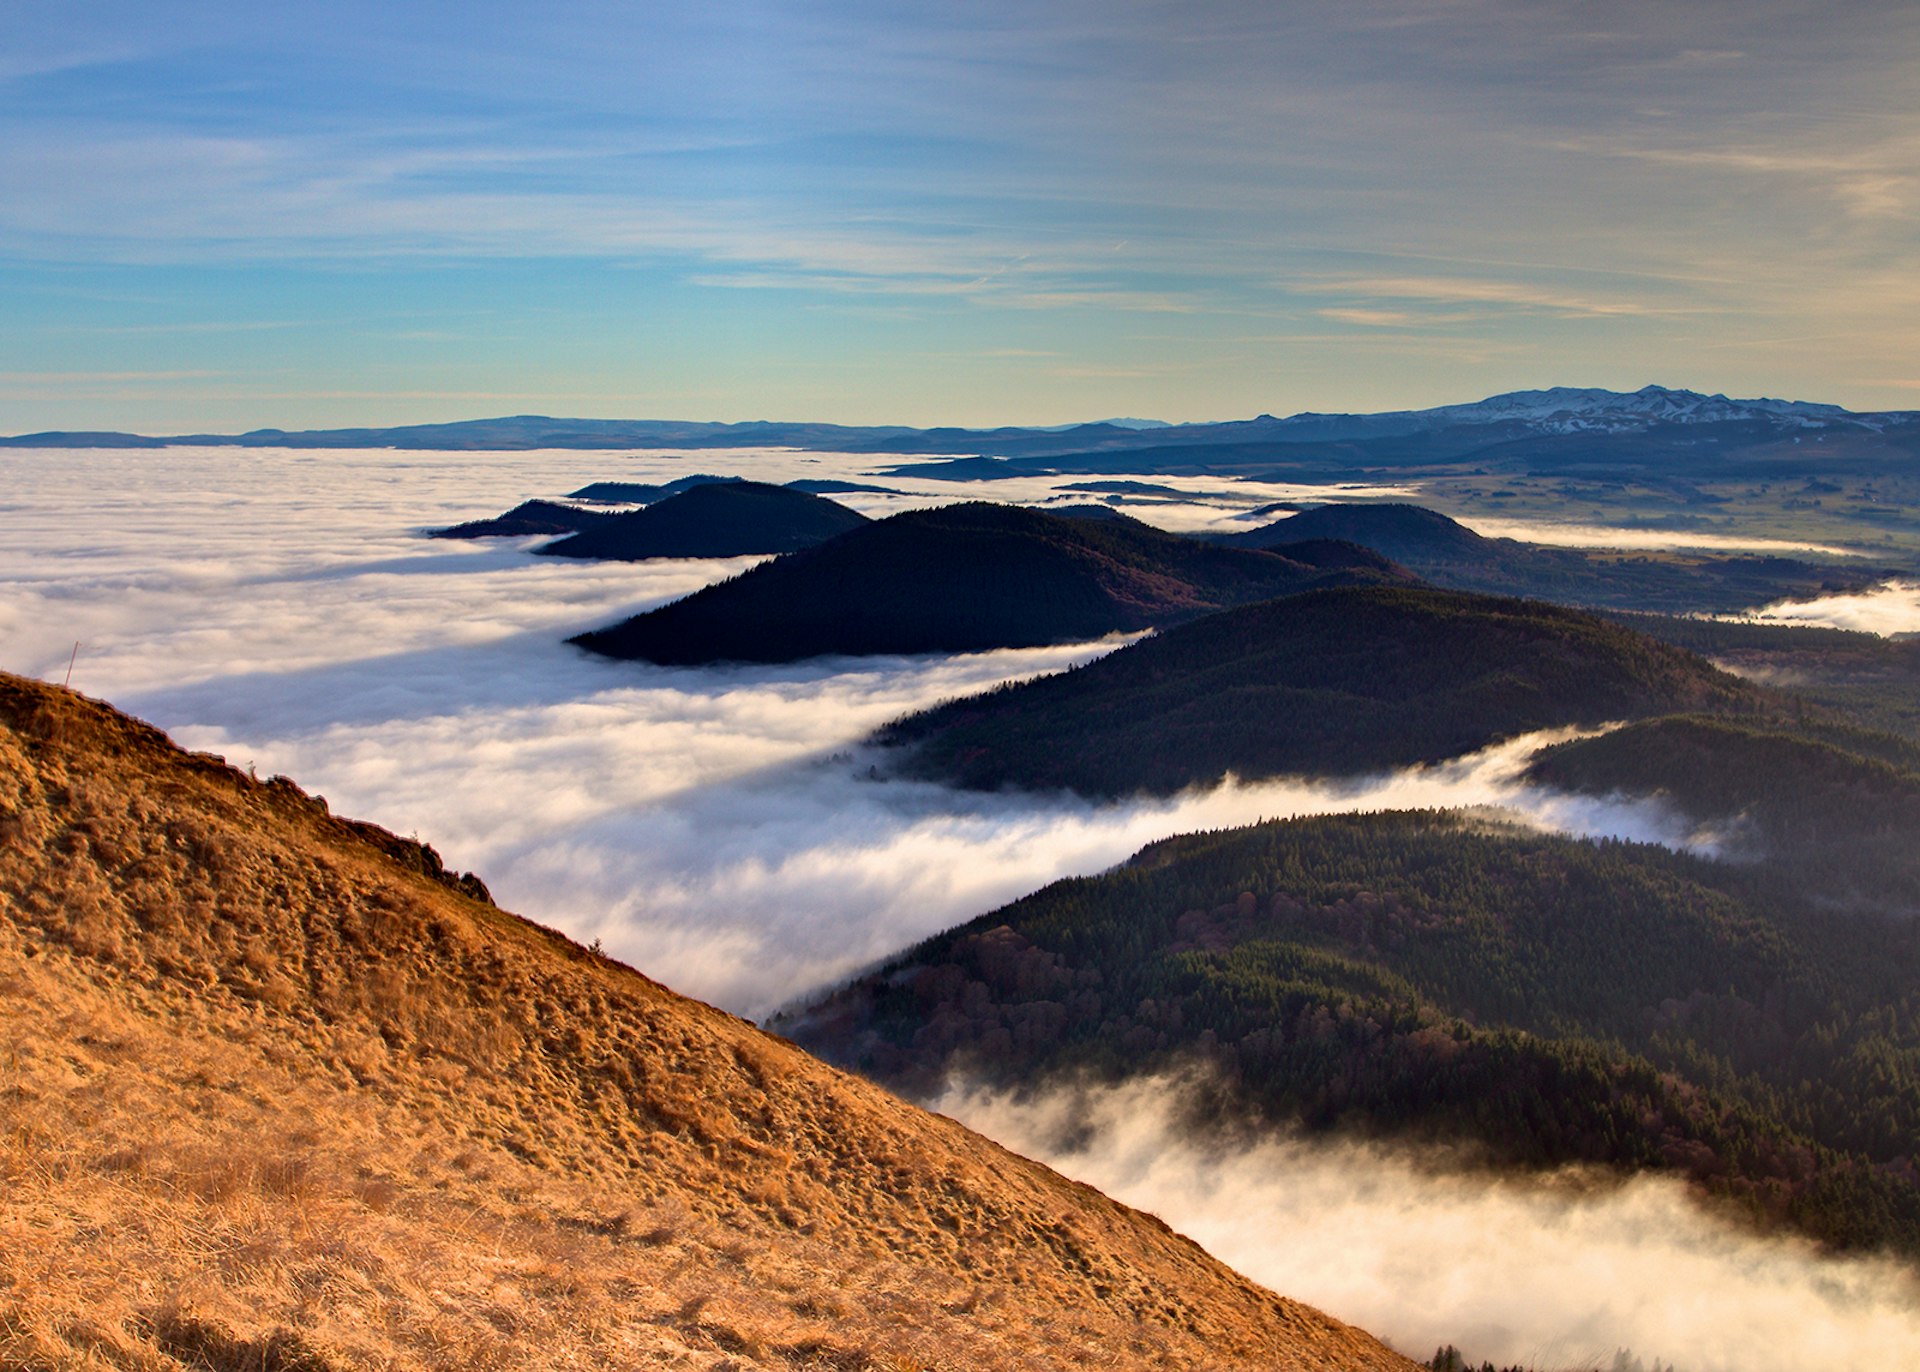 A chain of dormant volcanoes in Auvergne © Pommeyrol Vincent / Shutterstock